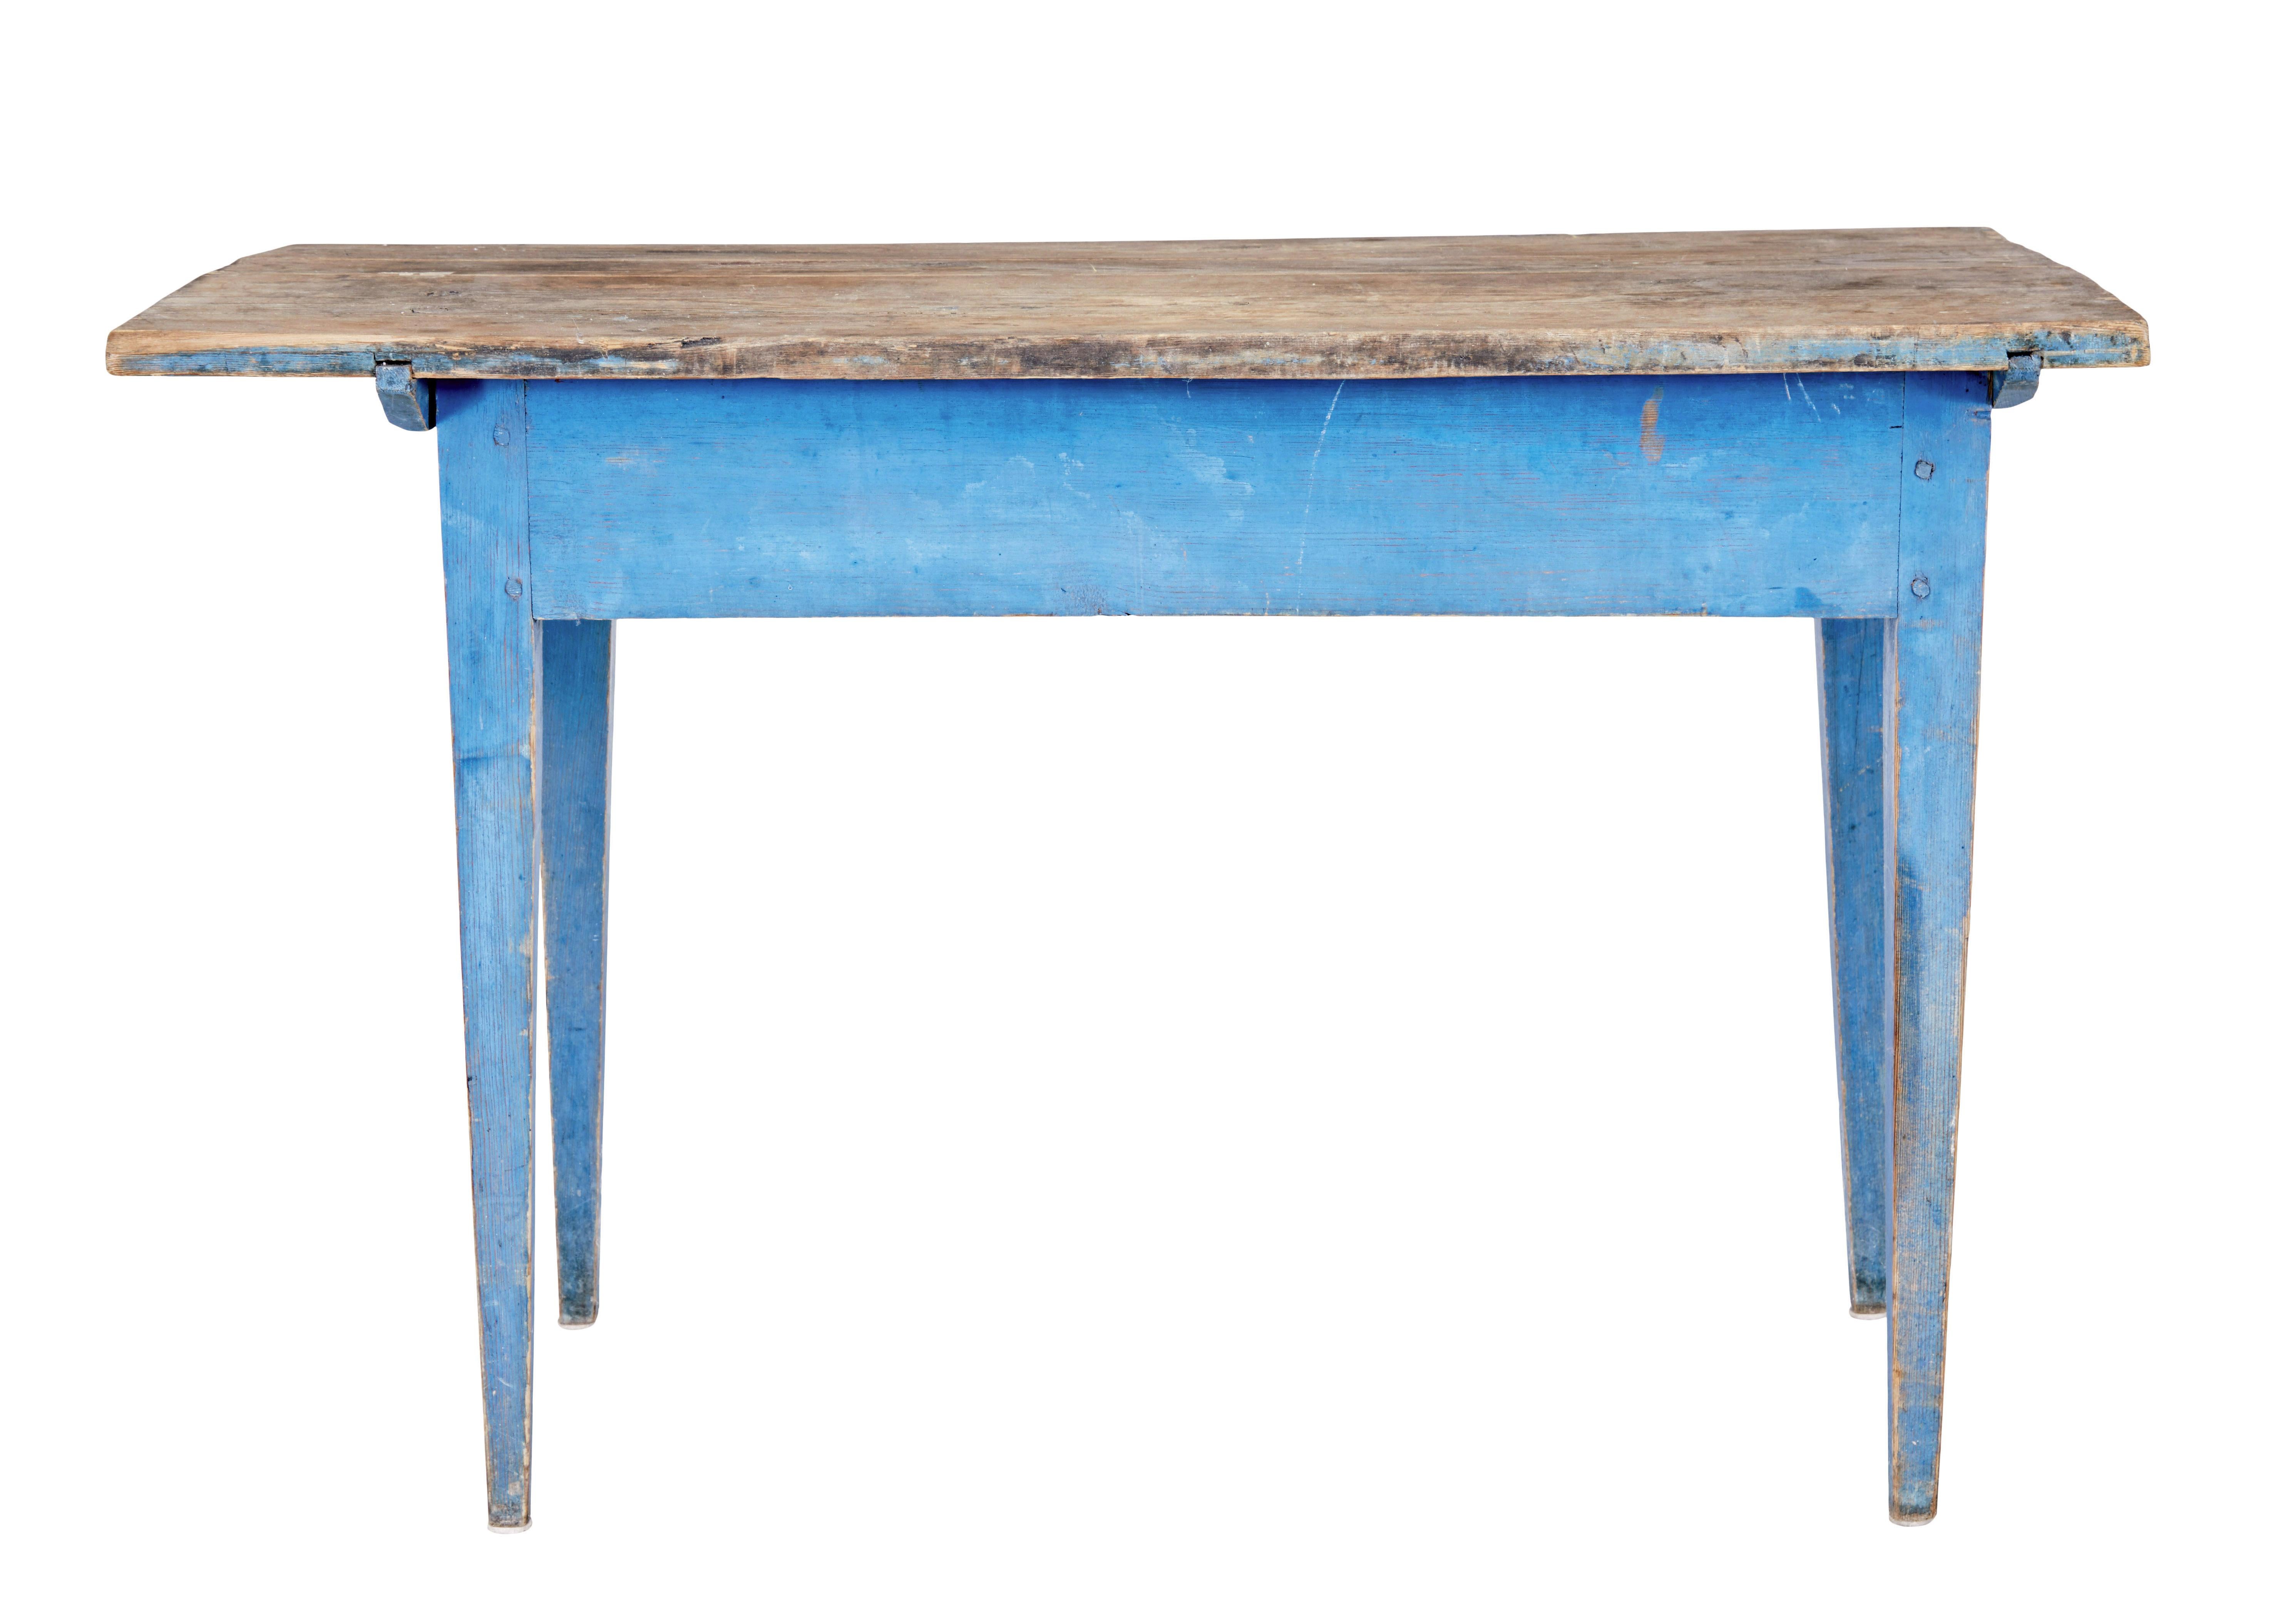 Rustic 19th century painted pine side table circa 1860.

Rustic swedish pine table with original scrubbed pine top and striking blue painted base.  Ideal for use in a garden room or to place in a modern interior.  Original patina, stands on 4